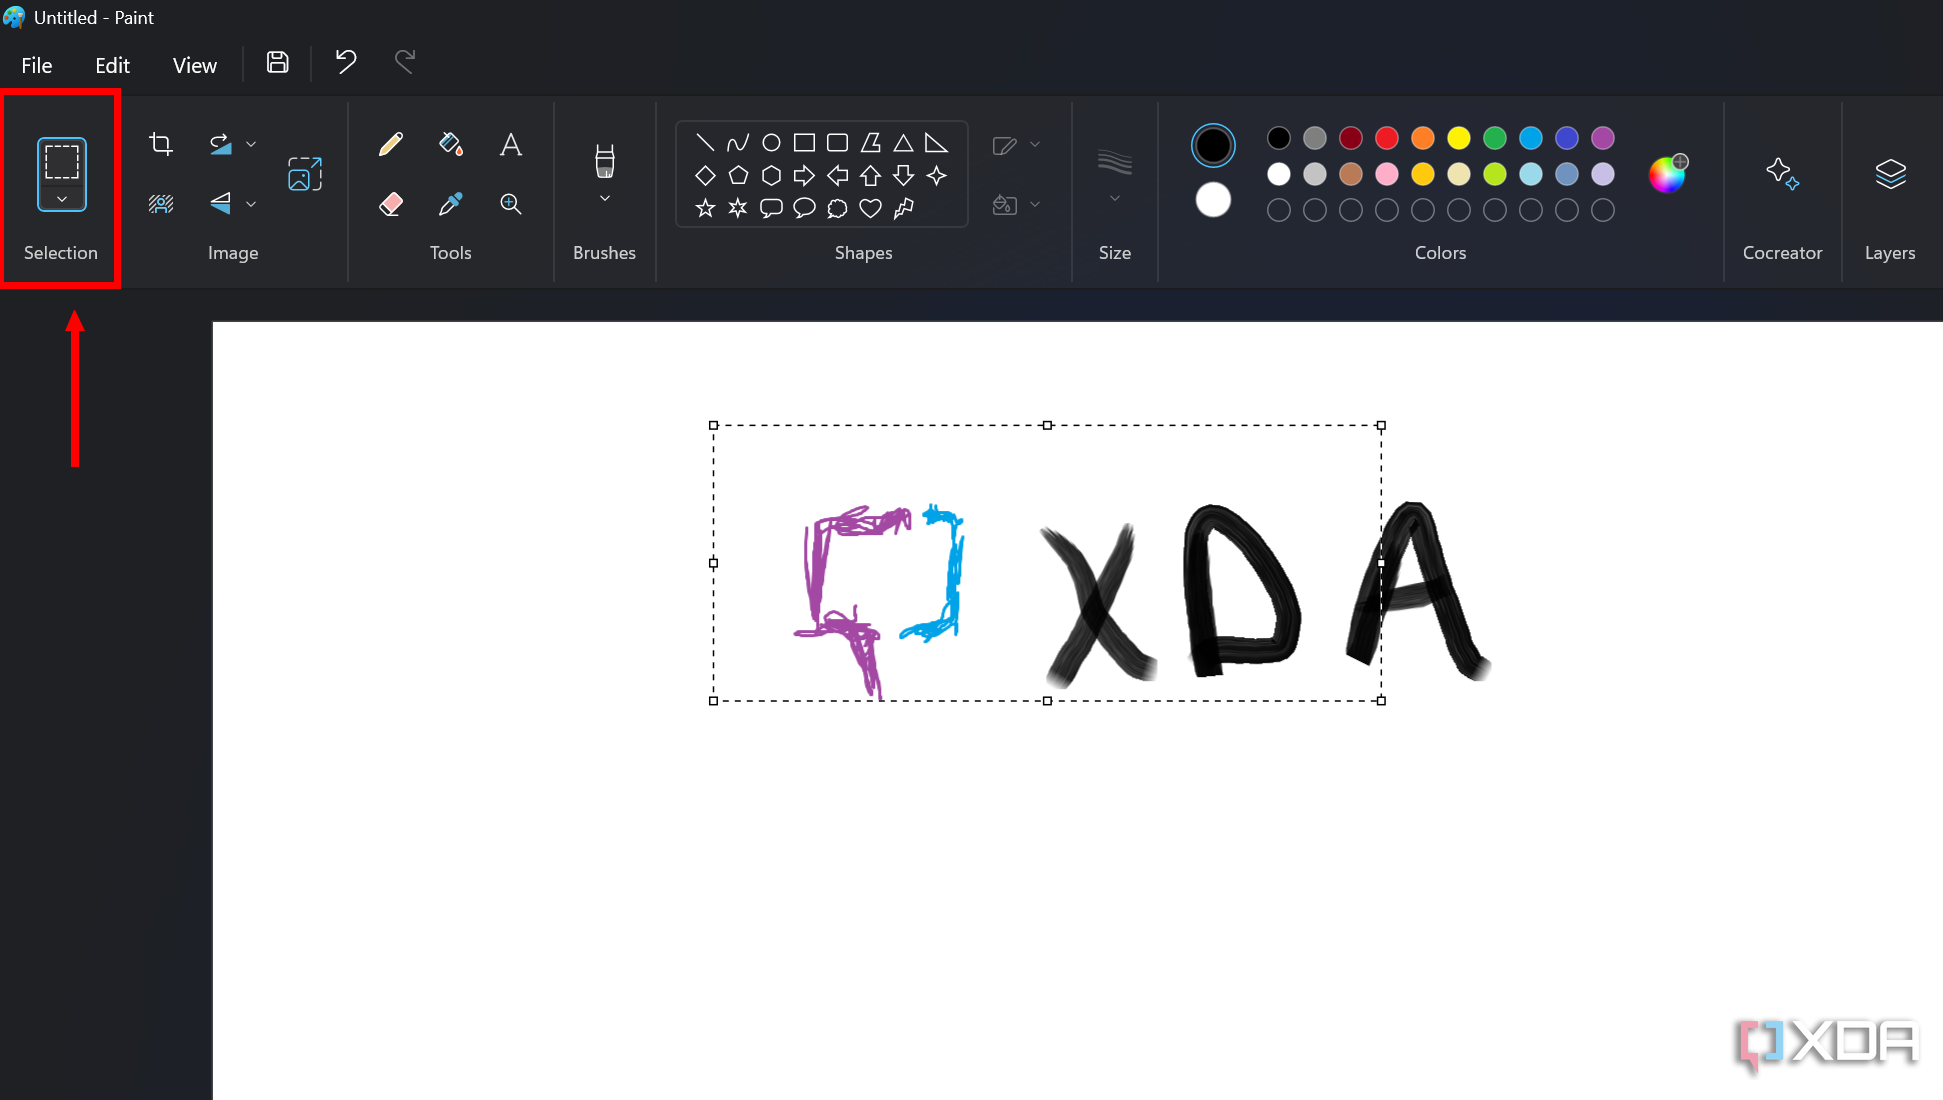 Screenshot of paint with the selection tool highlighted. A selection has been made on the canvas using the tool